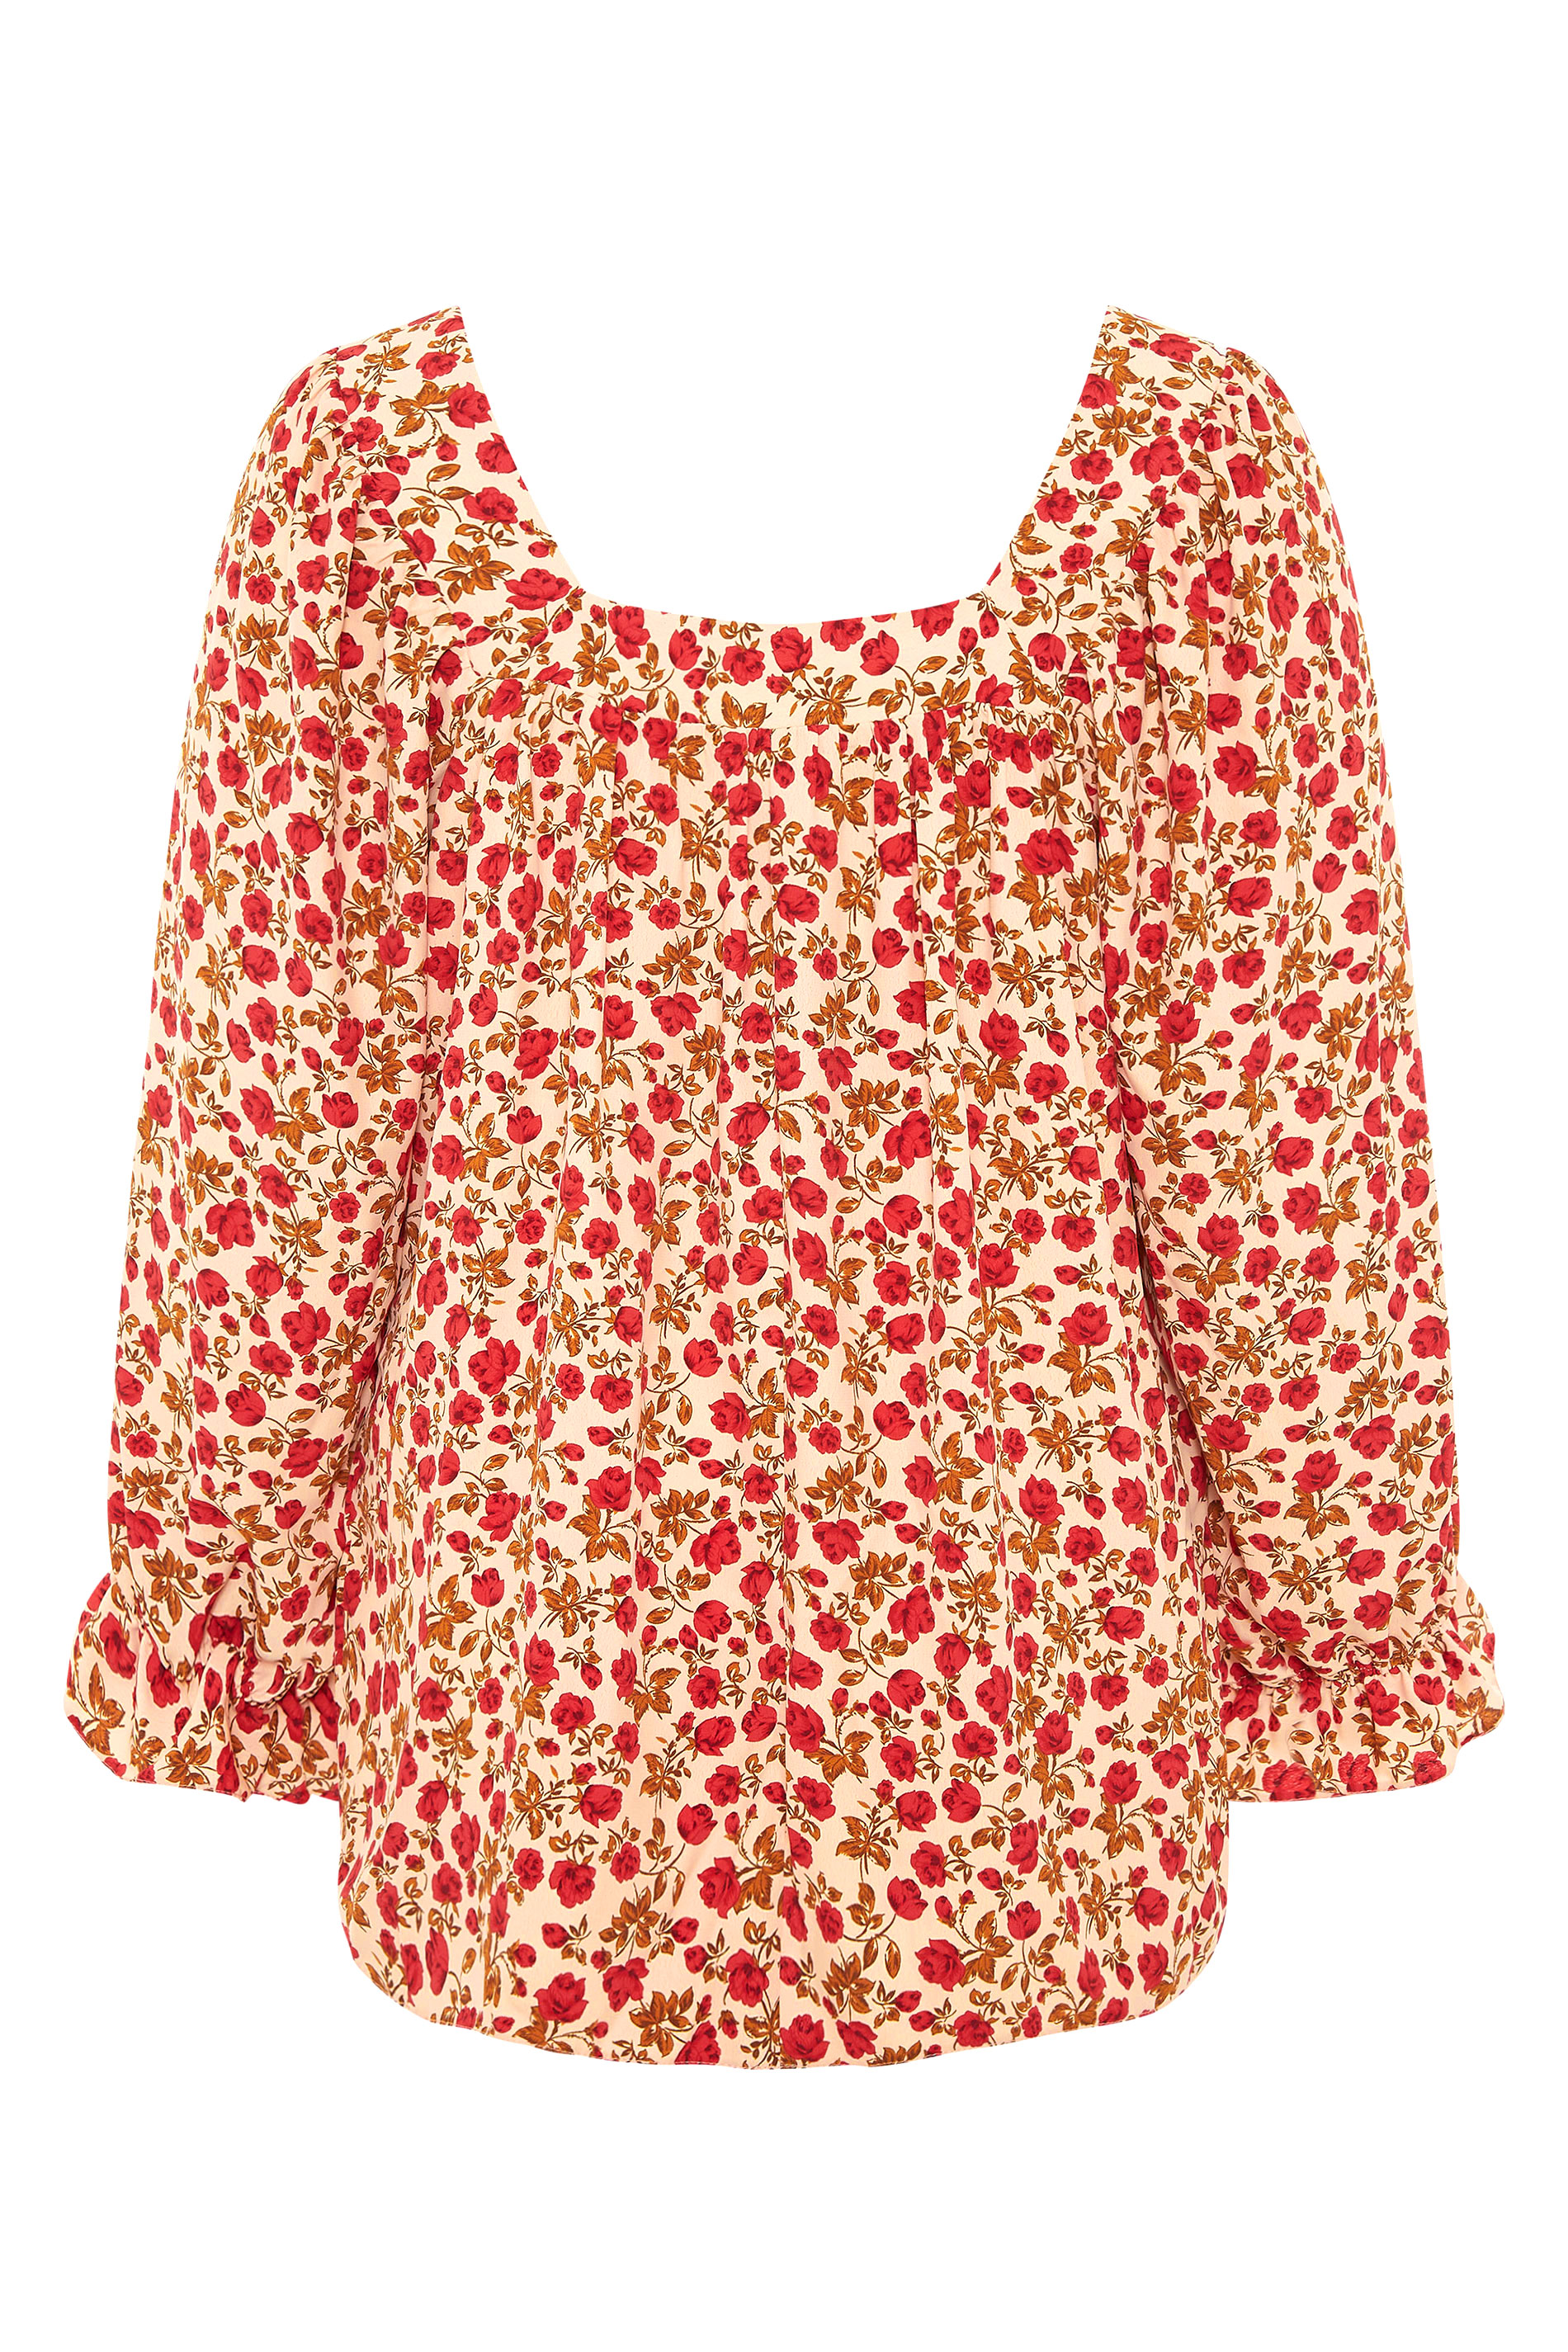 Grande taille  Tops Grande taille  Blouses & Chemisiers | LIMITED COLLECTION - Blouse Beige & Rouge Floral - VR51238